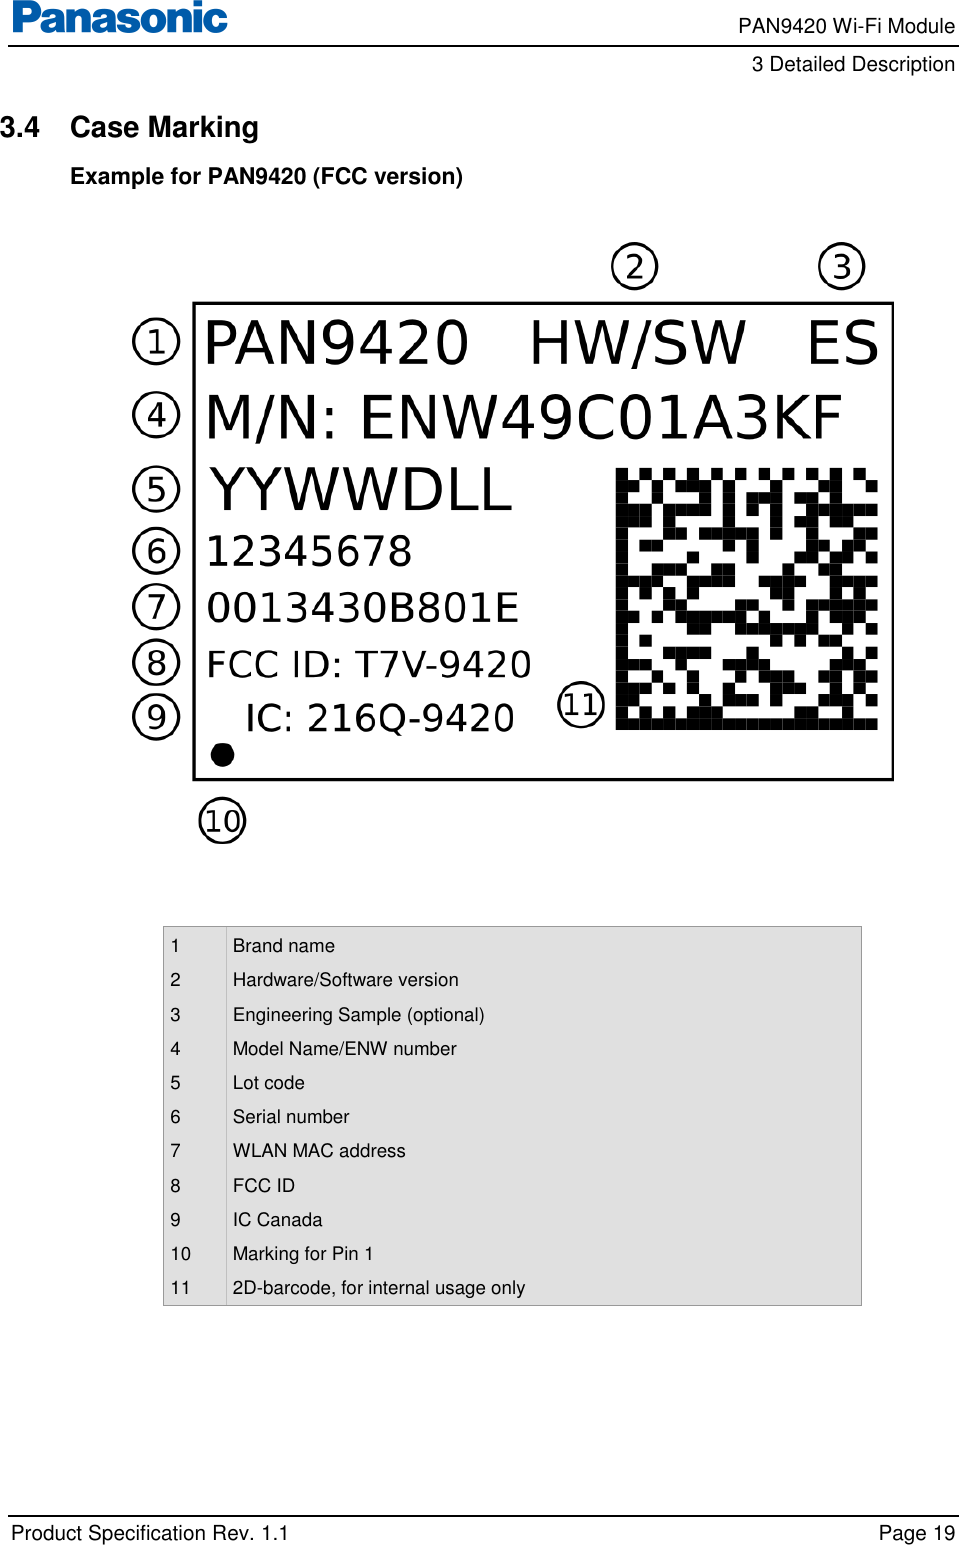     PAN9420 Wi-Fi Module         3 Detailed Description    Product Specification Rev. 1.1    Page 19  3.4  Case Marking Example for PAN9420 (FCC version)     1 2 3 4 5 6 7 8 9 10 11 Brand name Hardware/Software version Engineering Sample (optional) Model Name/ENW number Lot code Serial number WLAN MAC address FCC ID IC Canada Marking for Pin 1 2D-barcode, for internal usage only  